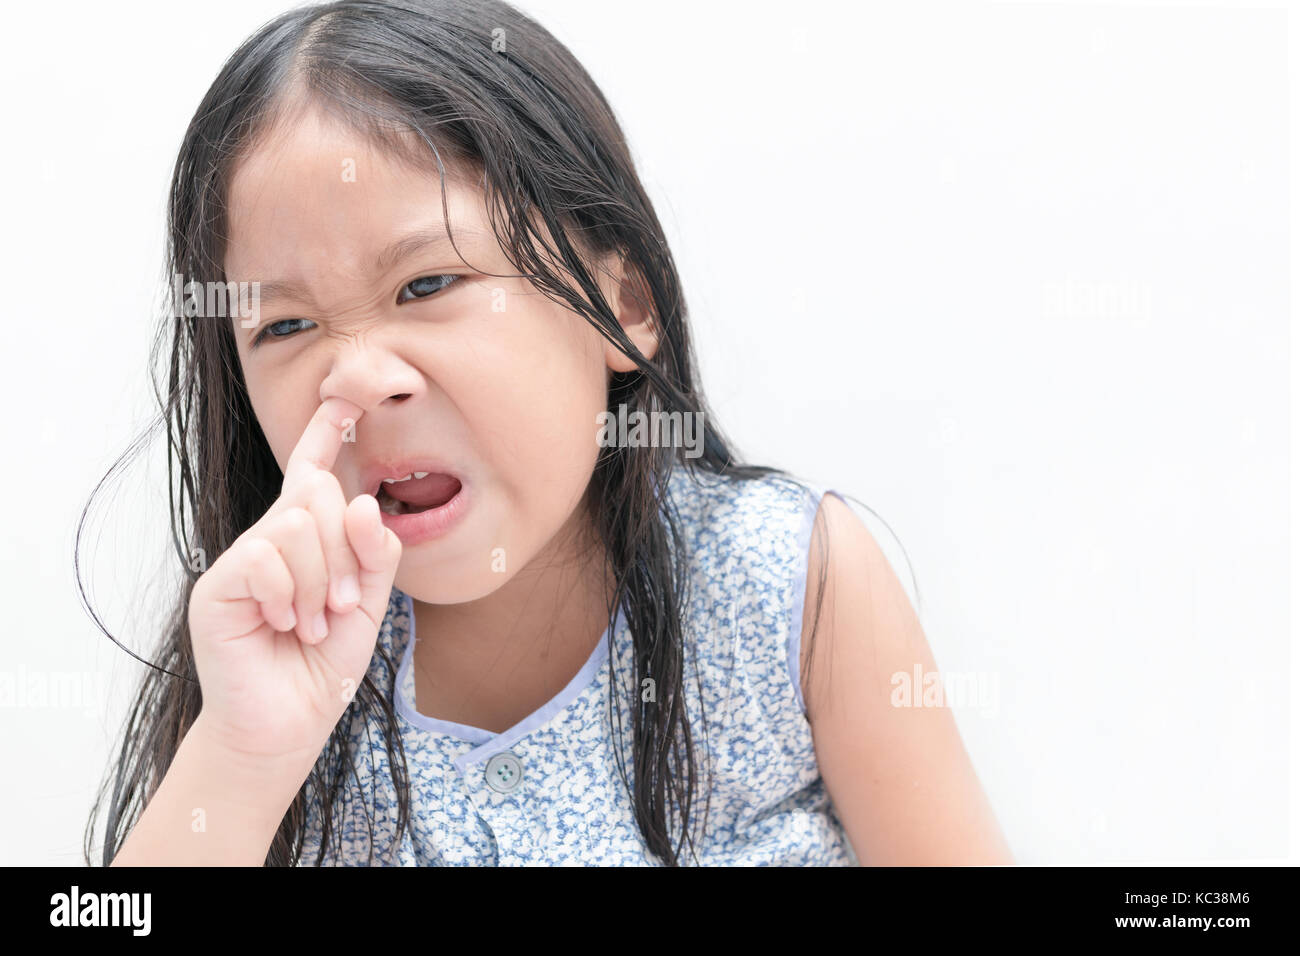 Little cute girl pick her nose on white background, Health care and hygiene concept Stock Photo